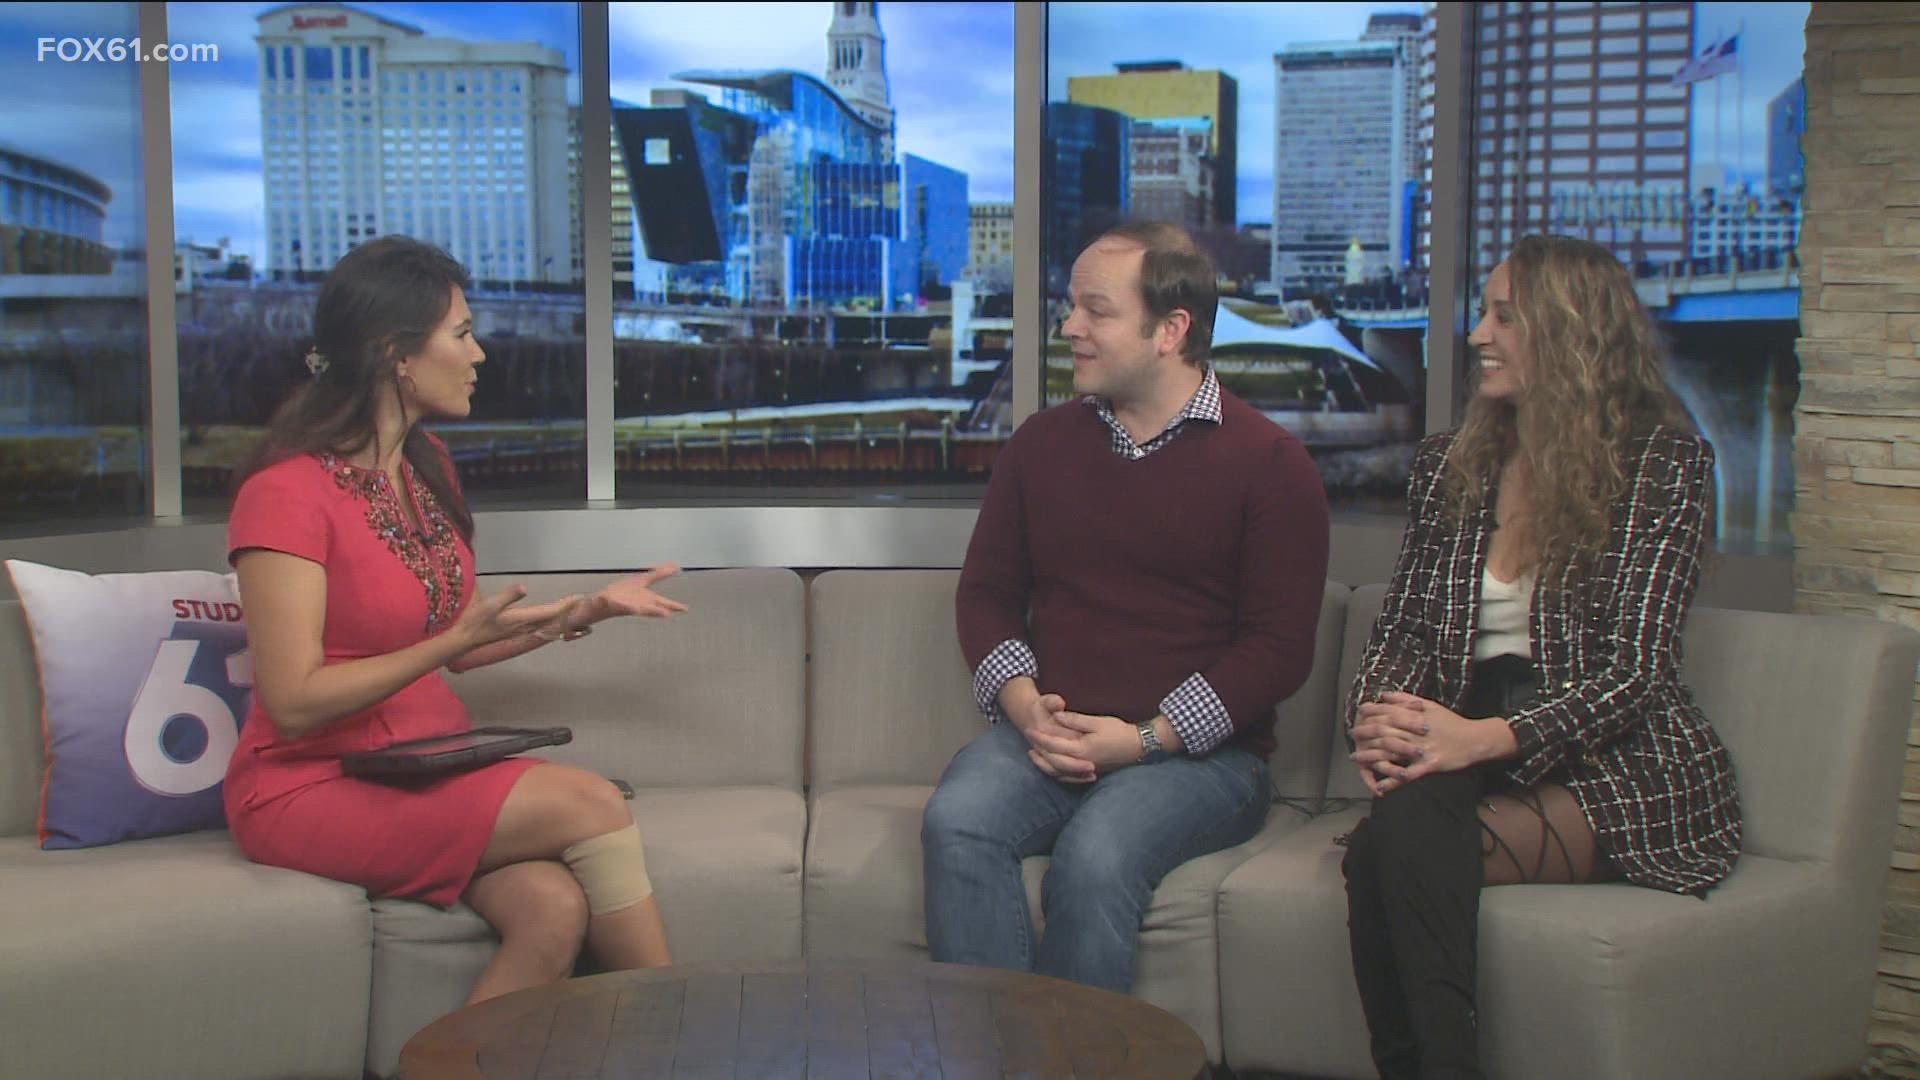 "A Charles Dicken's Christmas" will run at Playhouse on the Park. David Addis the Director and Shannon Hofheimer, who is an actor, share details.